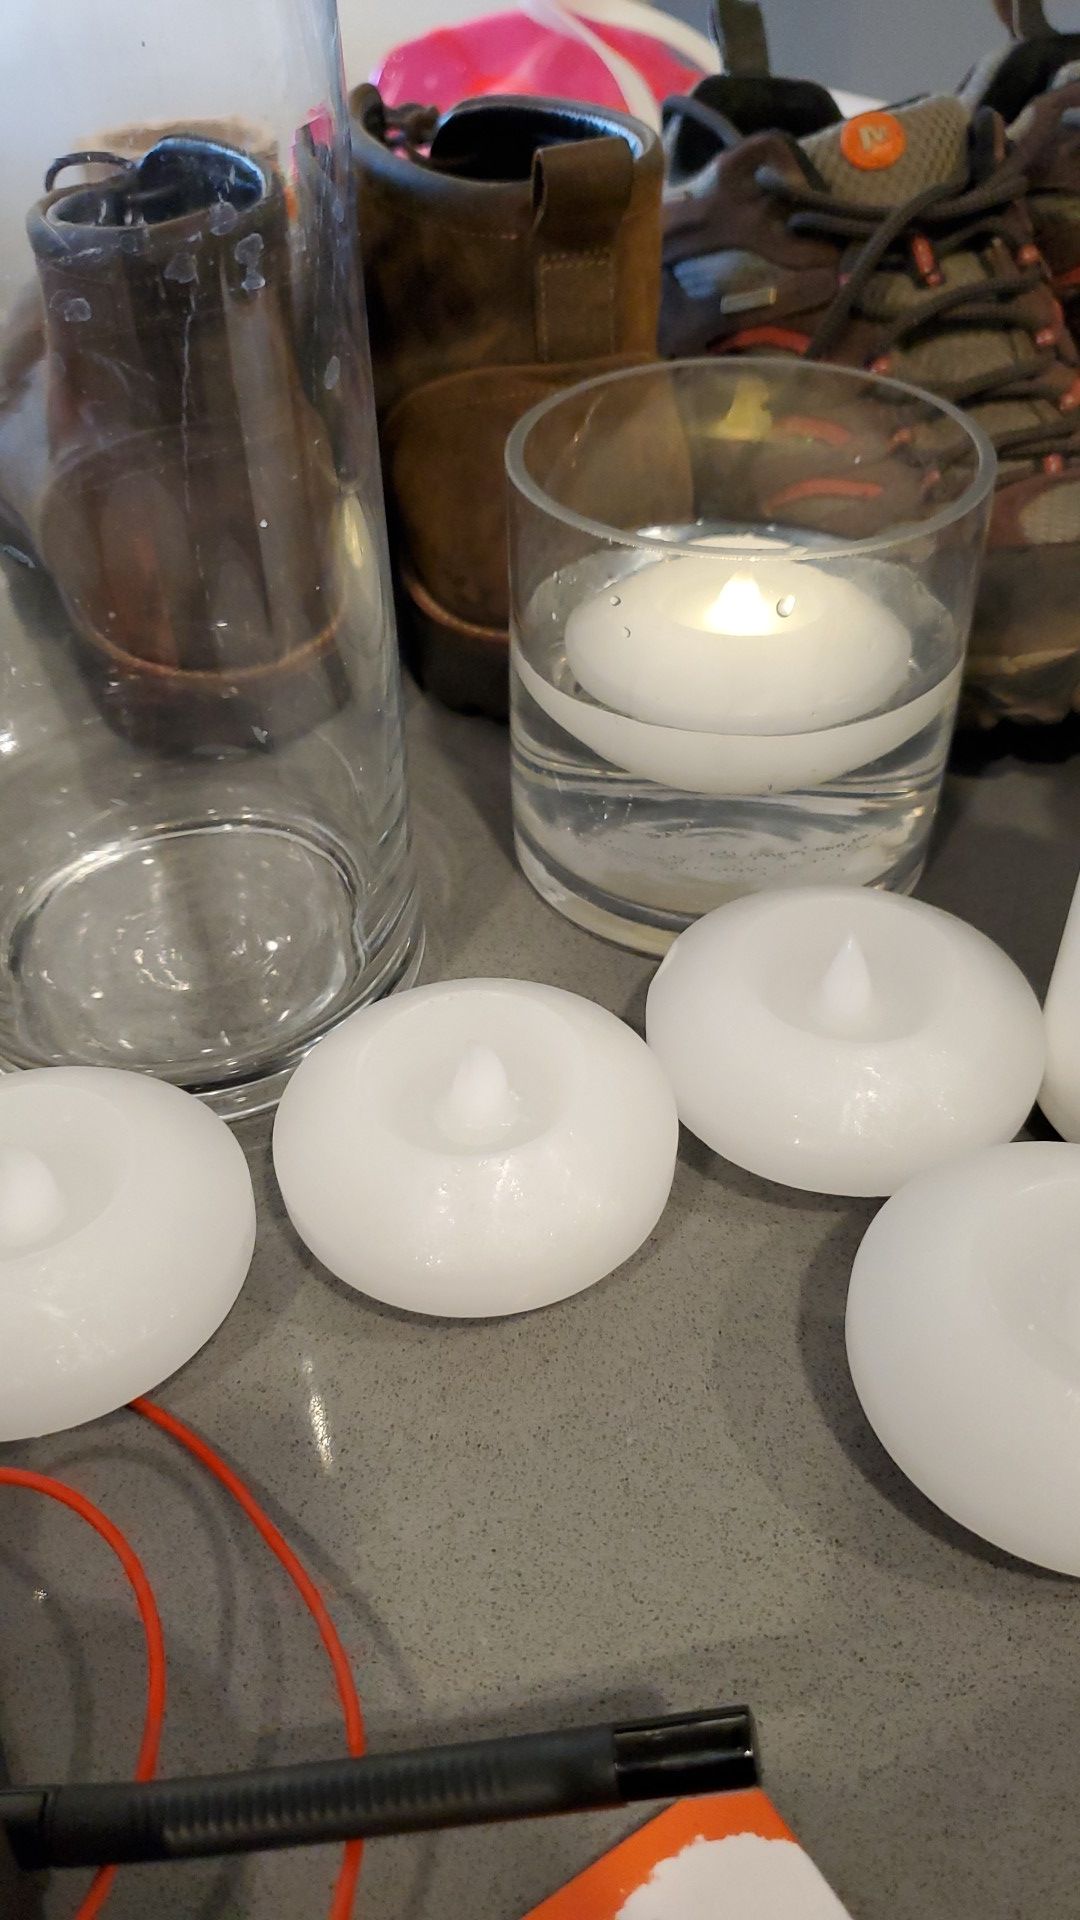 Water activated battery powered candles